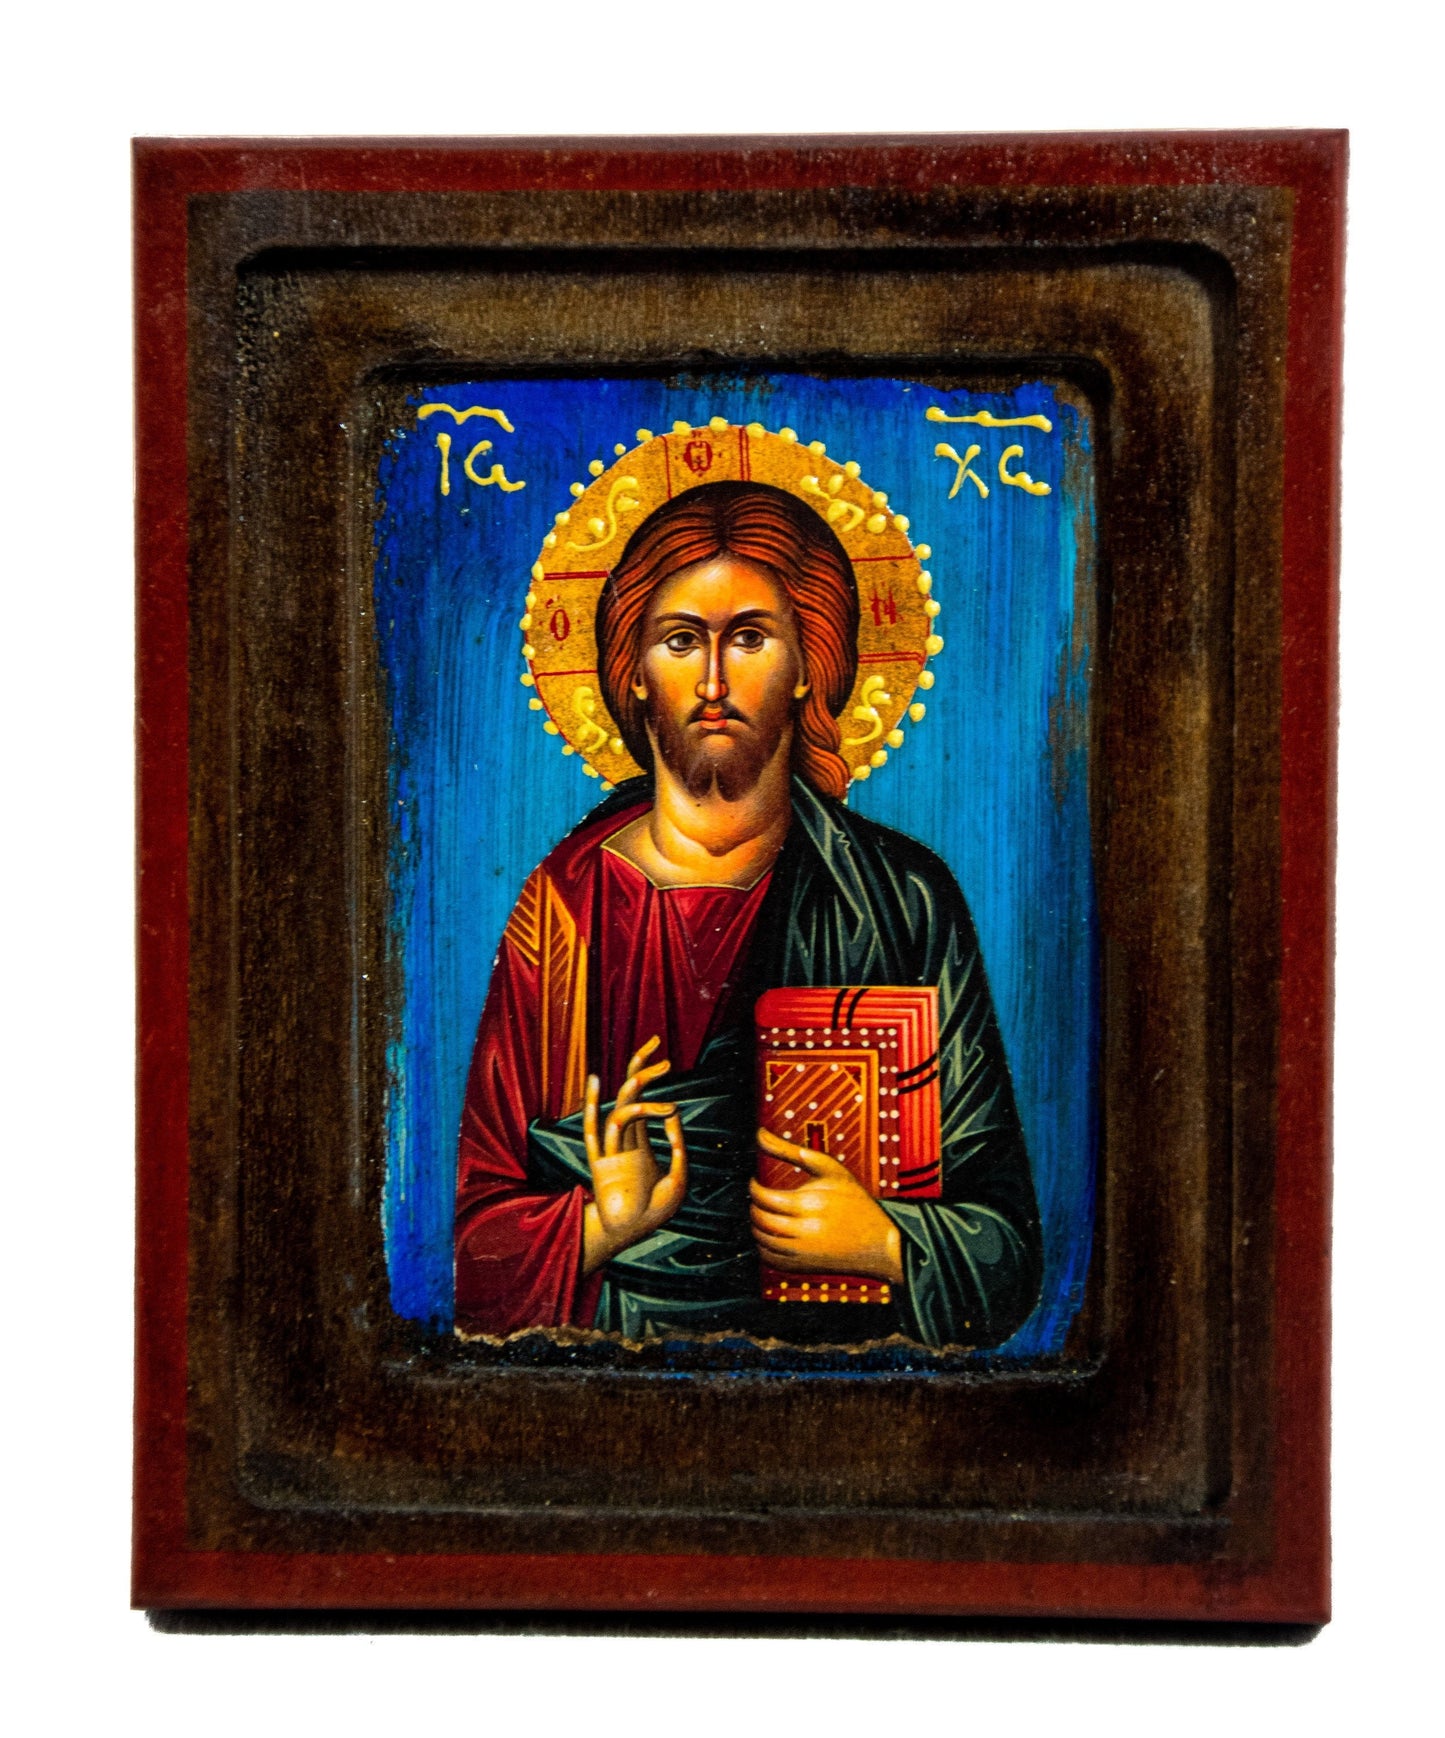 Jesus Christ icon, Handmade Greek Orthodox icon, Byzantine art wall hanging icon of our Lord on wood plaque, religious decor 19x15cm TheHolyArt